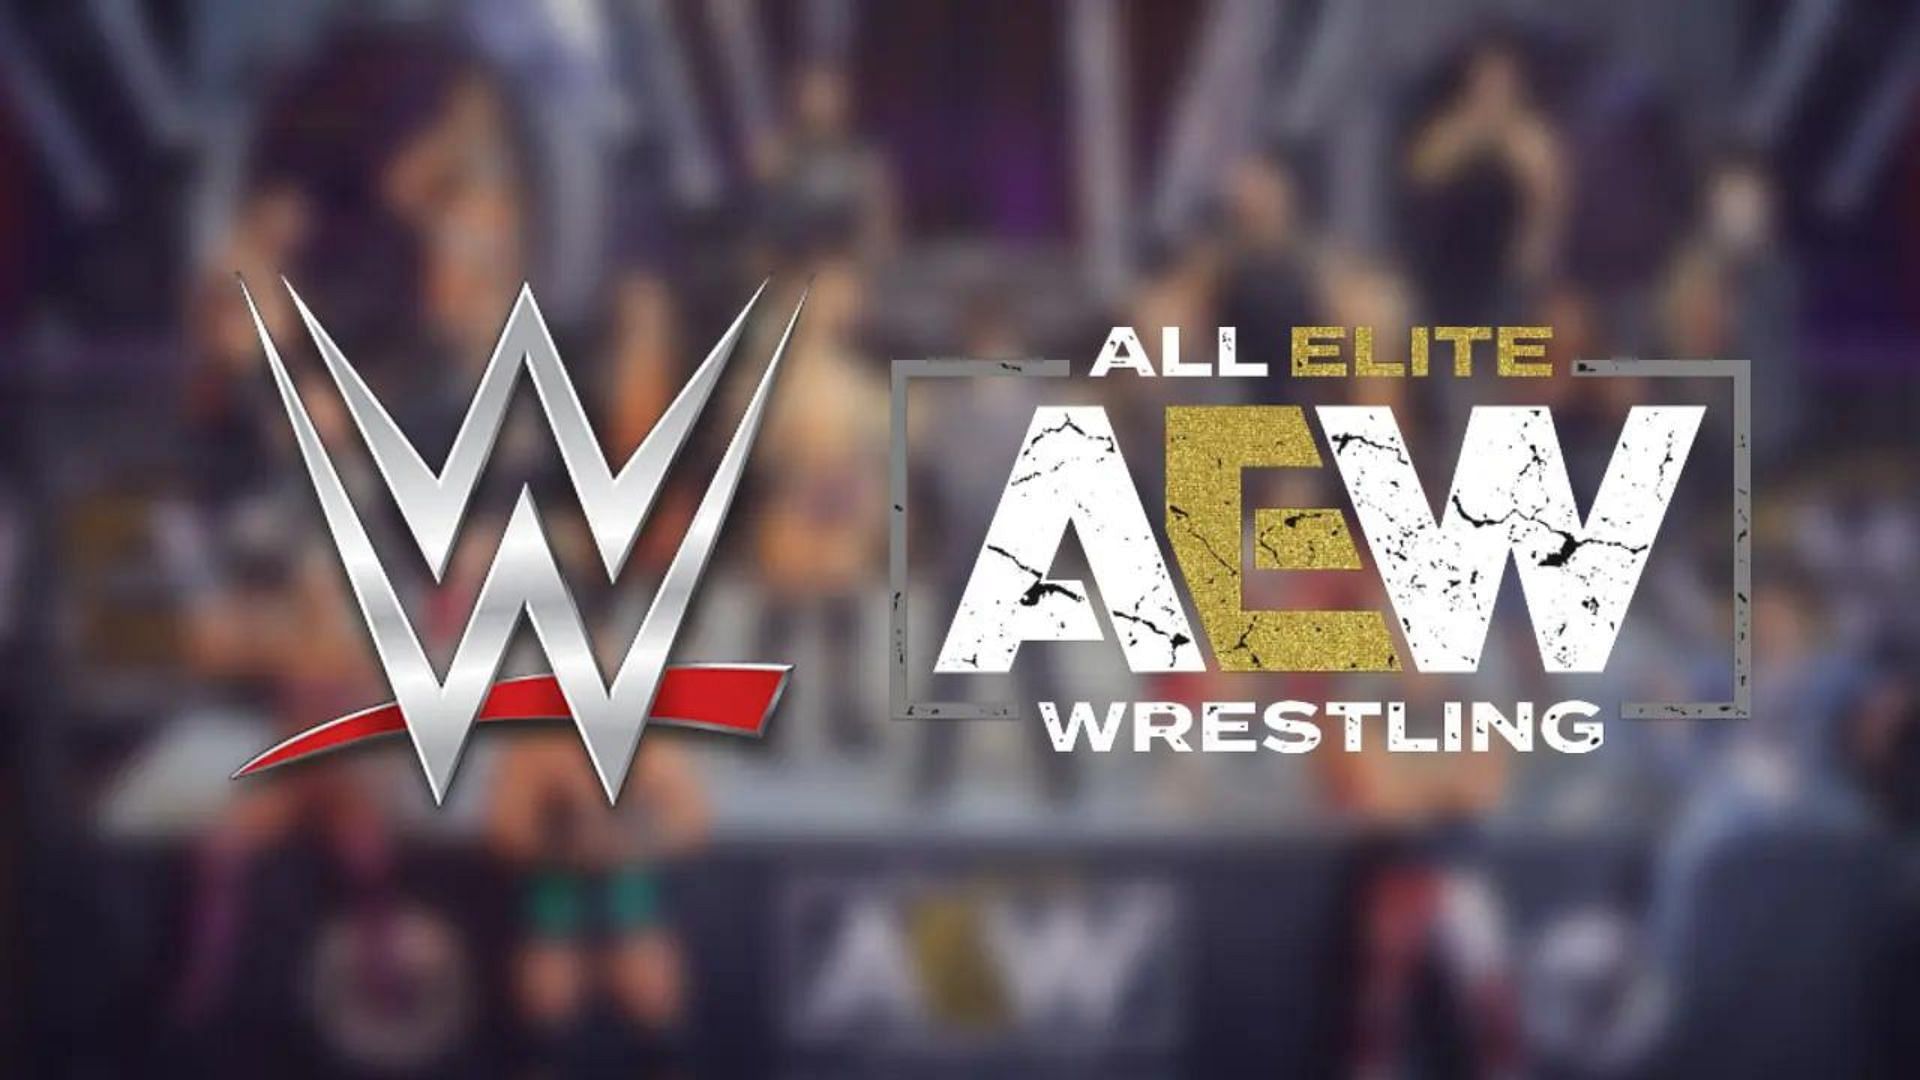 WWE and AEW are the two biggest wrestling promotion in the world